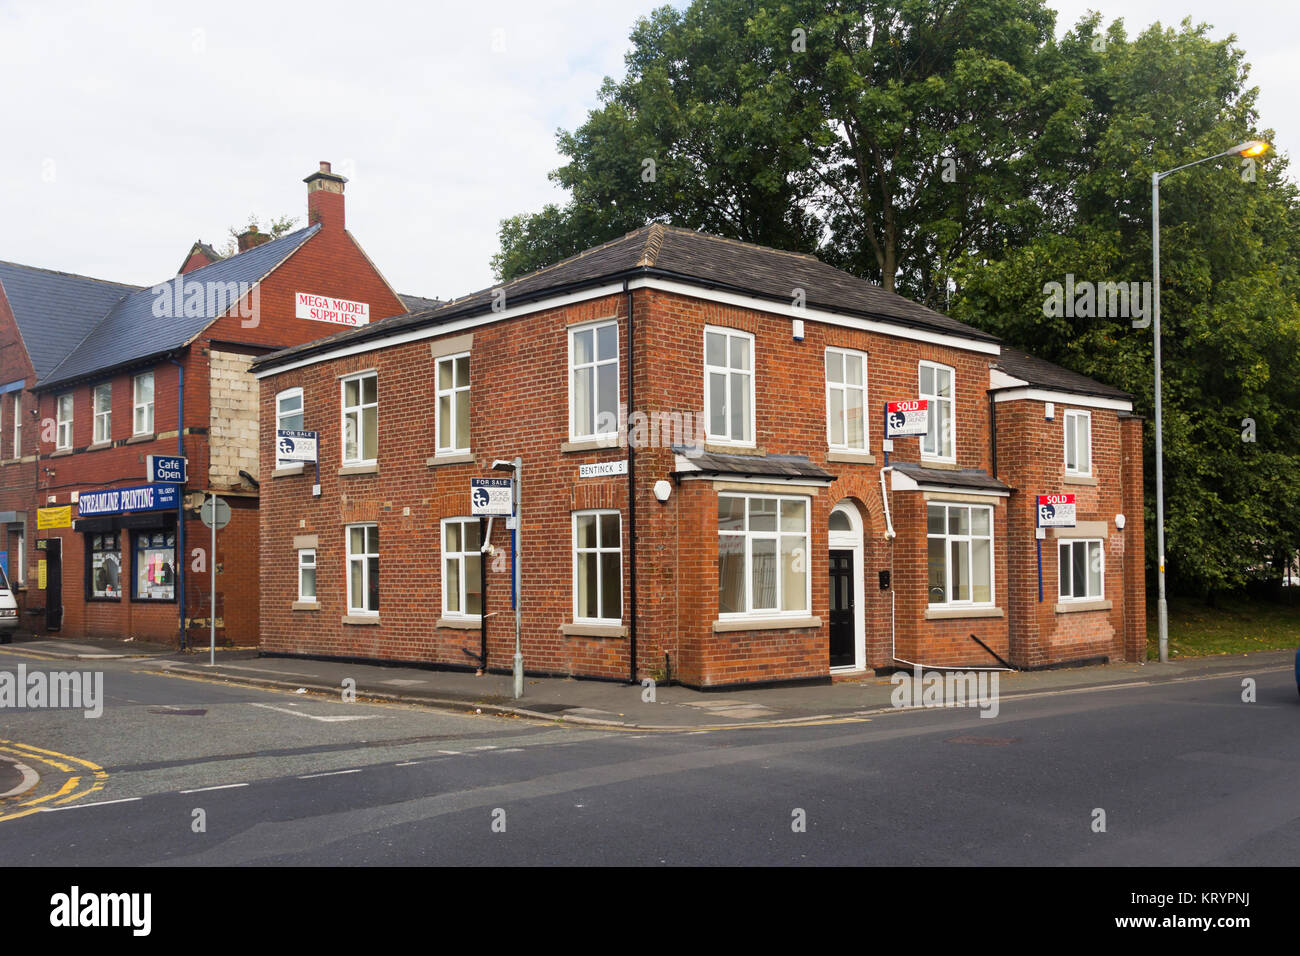 Former public house 'The Park' on Egerton Road, Farnworth. Closed in 2013 it has now been converted to residential use as four self-contained flats. Stock Photo